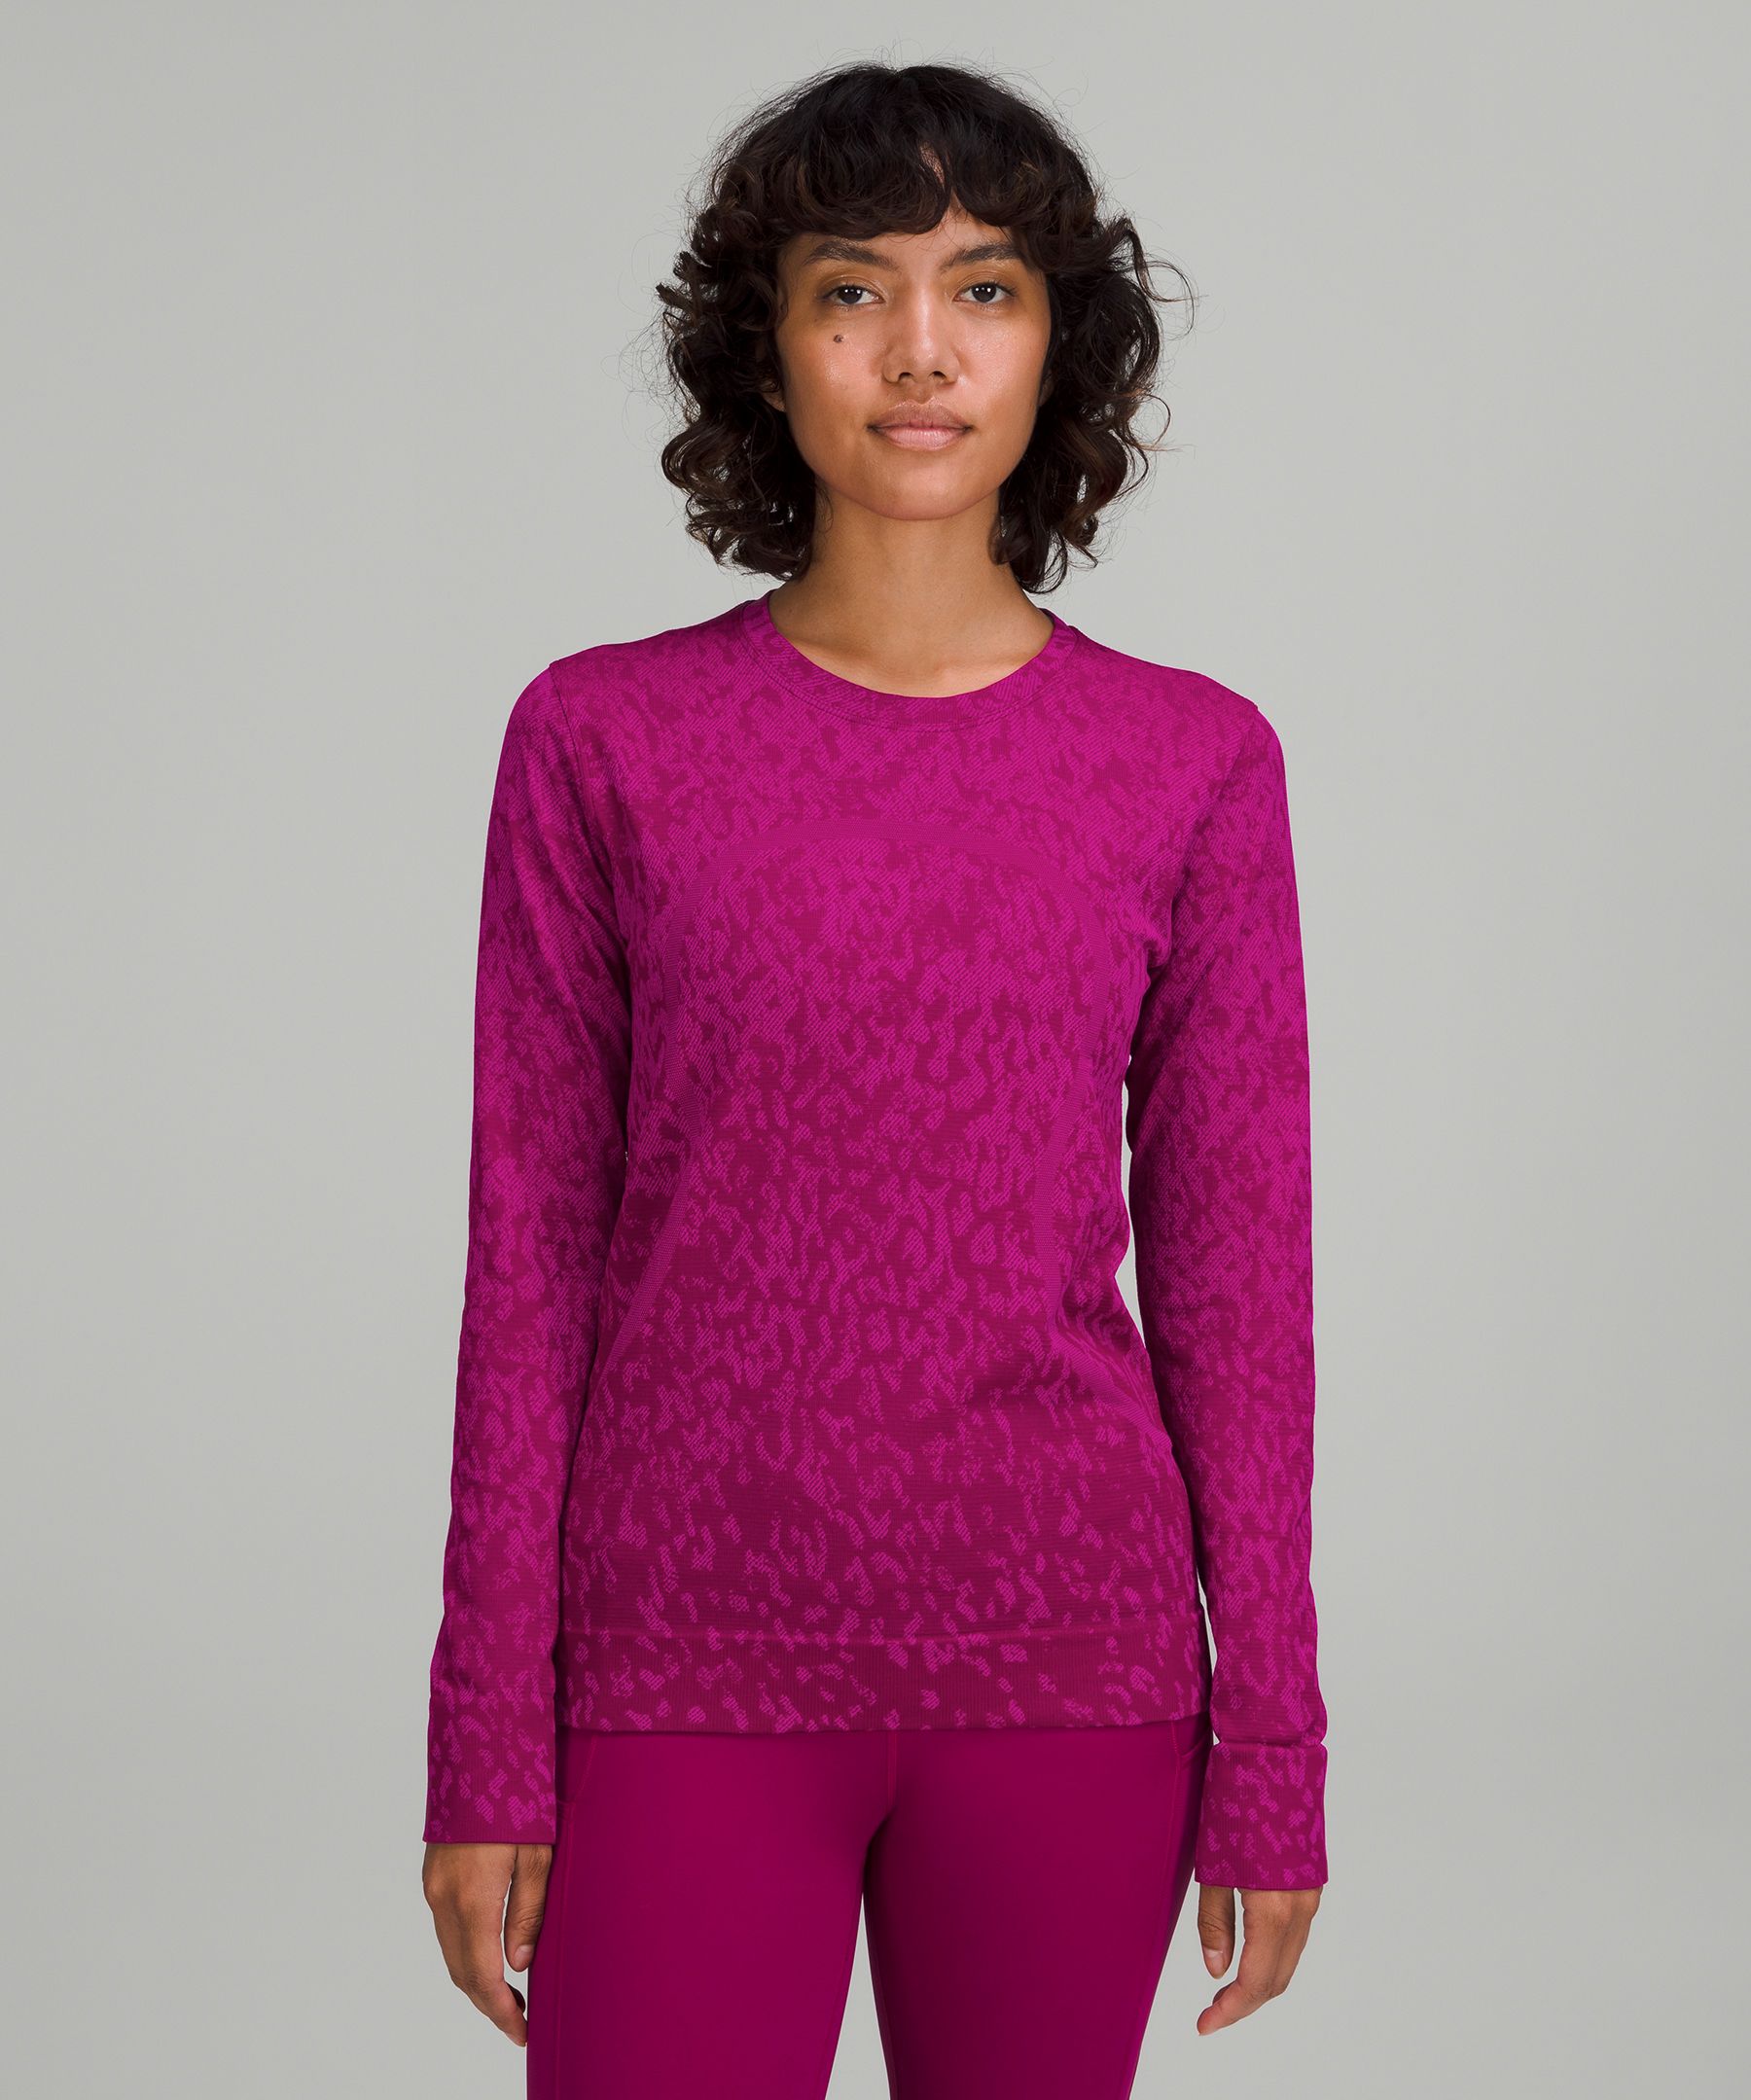 Lululemon Swiftly Relaxed-fit Long Sleeve Shirt In Covered Camo Magenta Purple/purple Highlight